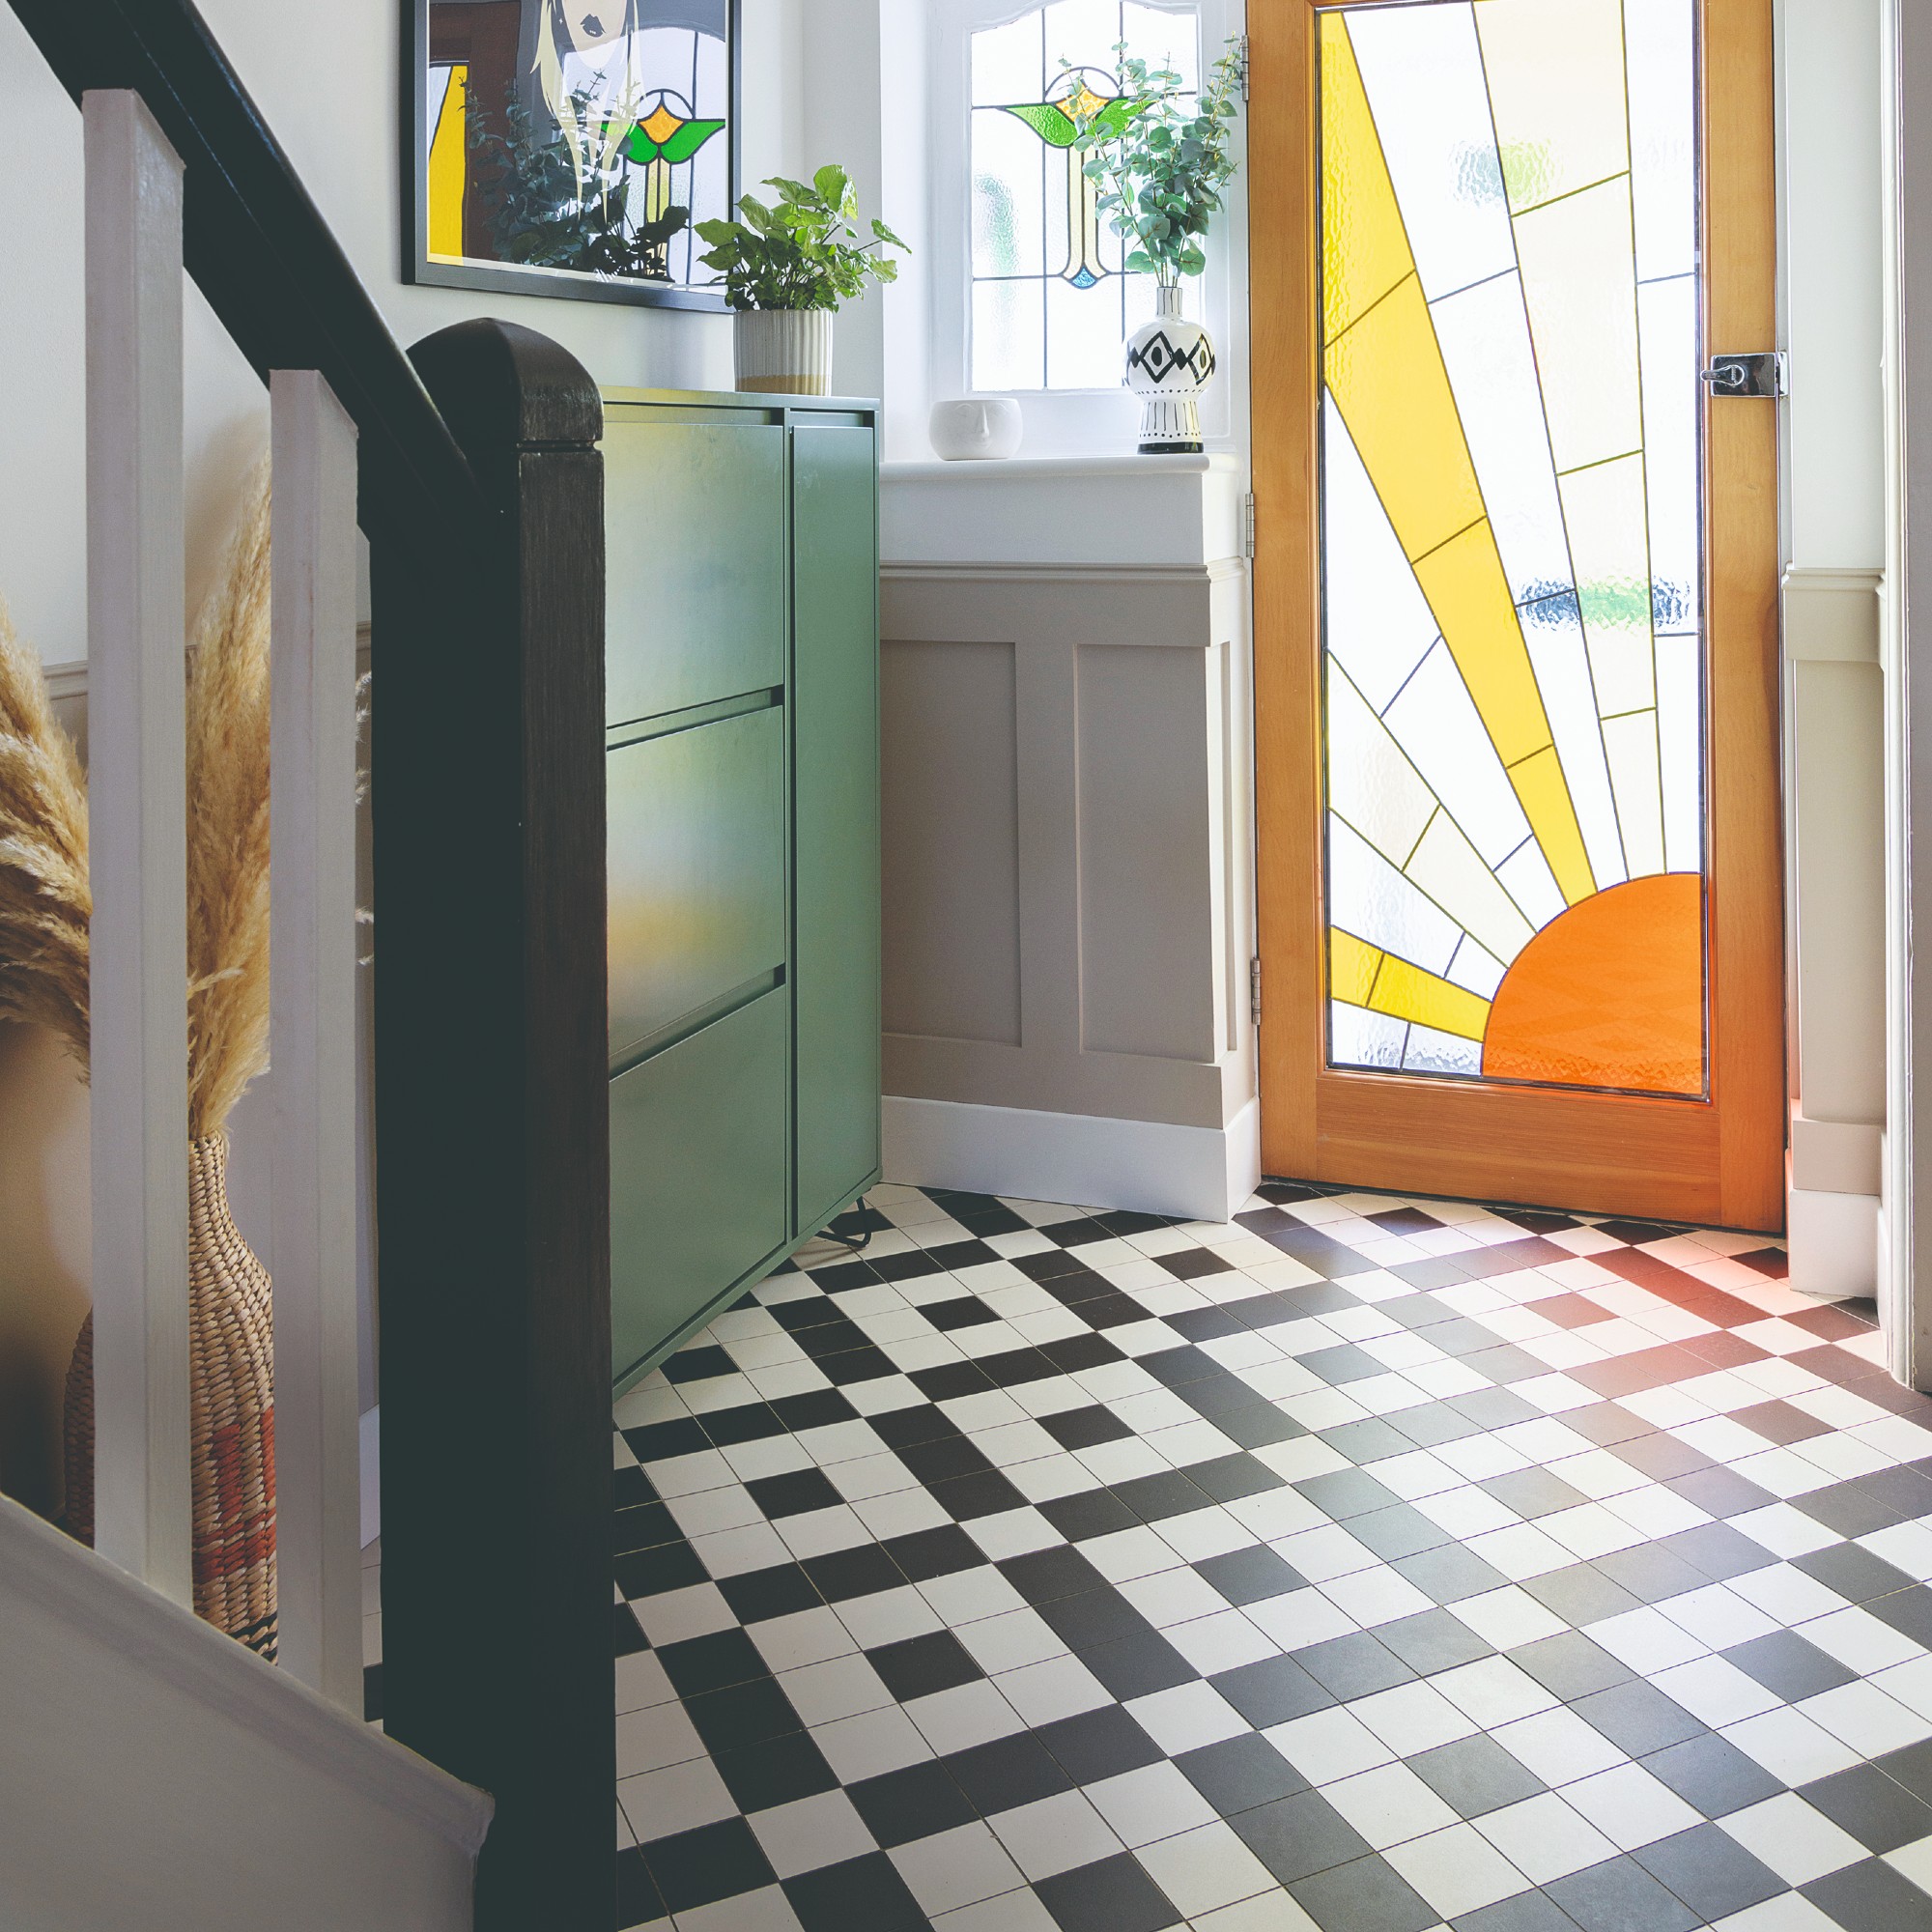 A hallway with a tiled patterned floor and glass front door